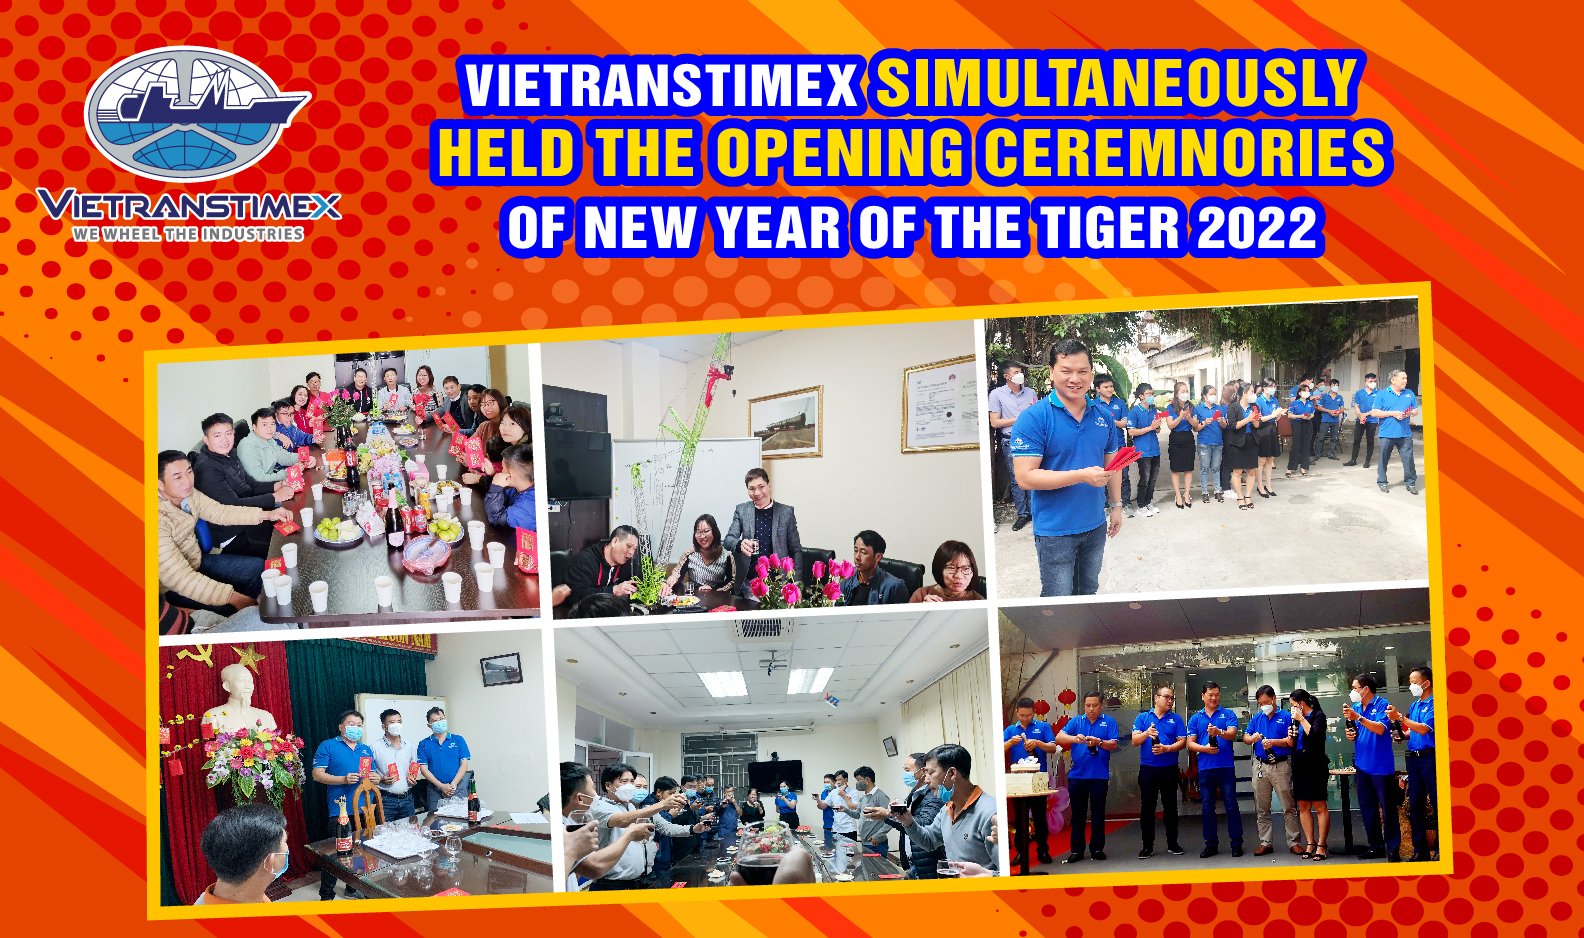 Vietranstimex Simultaneously Held The Opening Ceremnories Of New Year Of The Tiger 2022